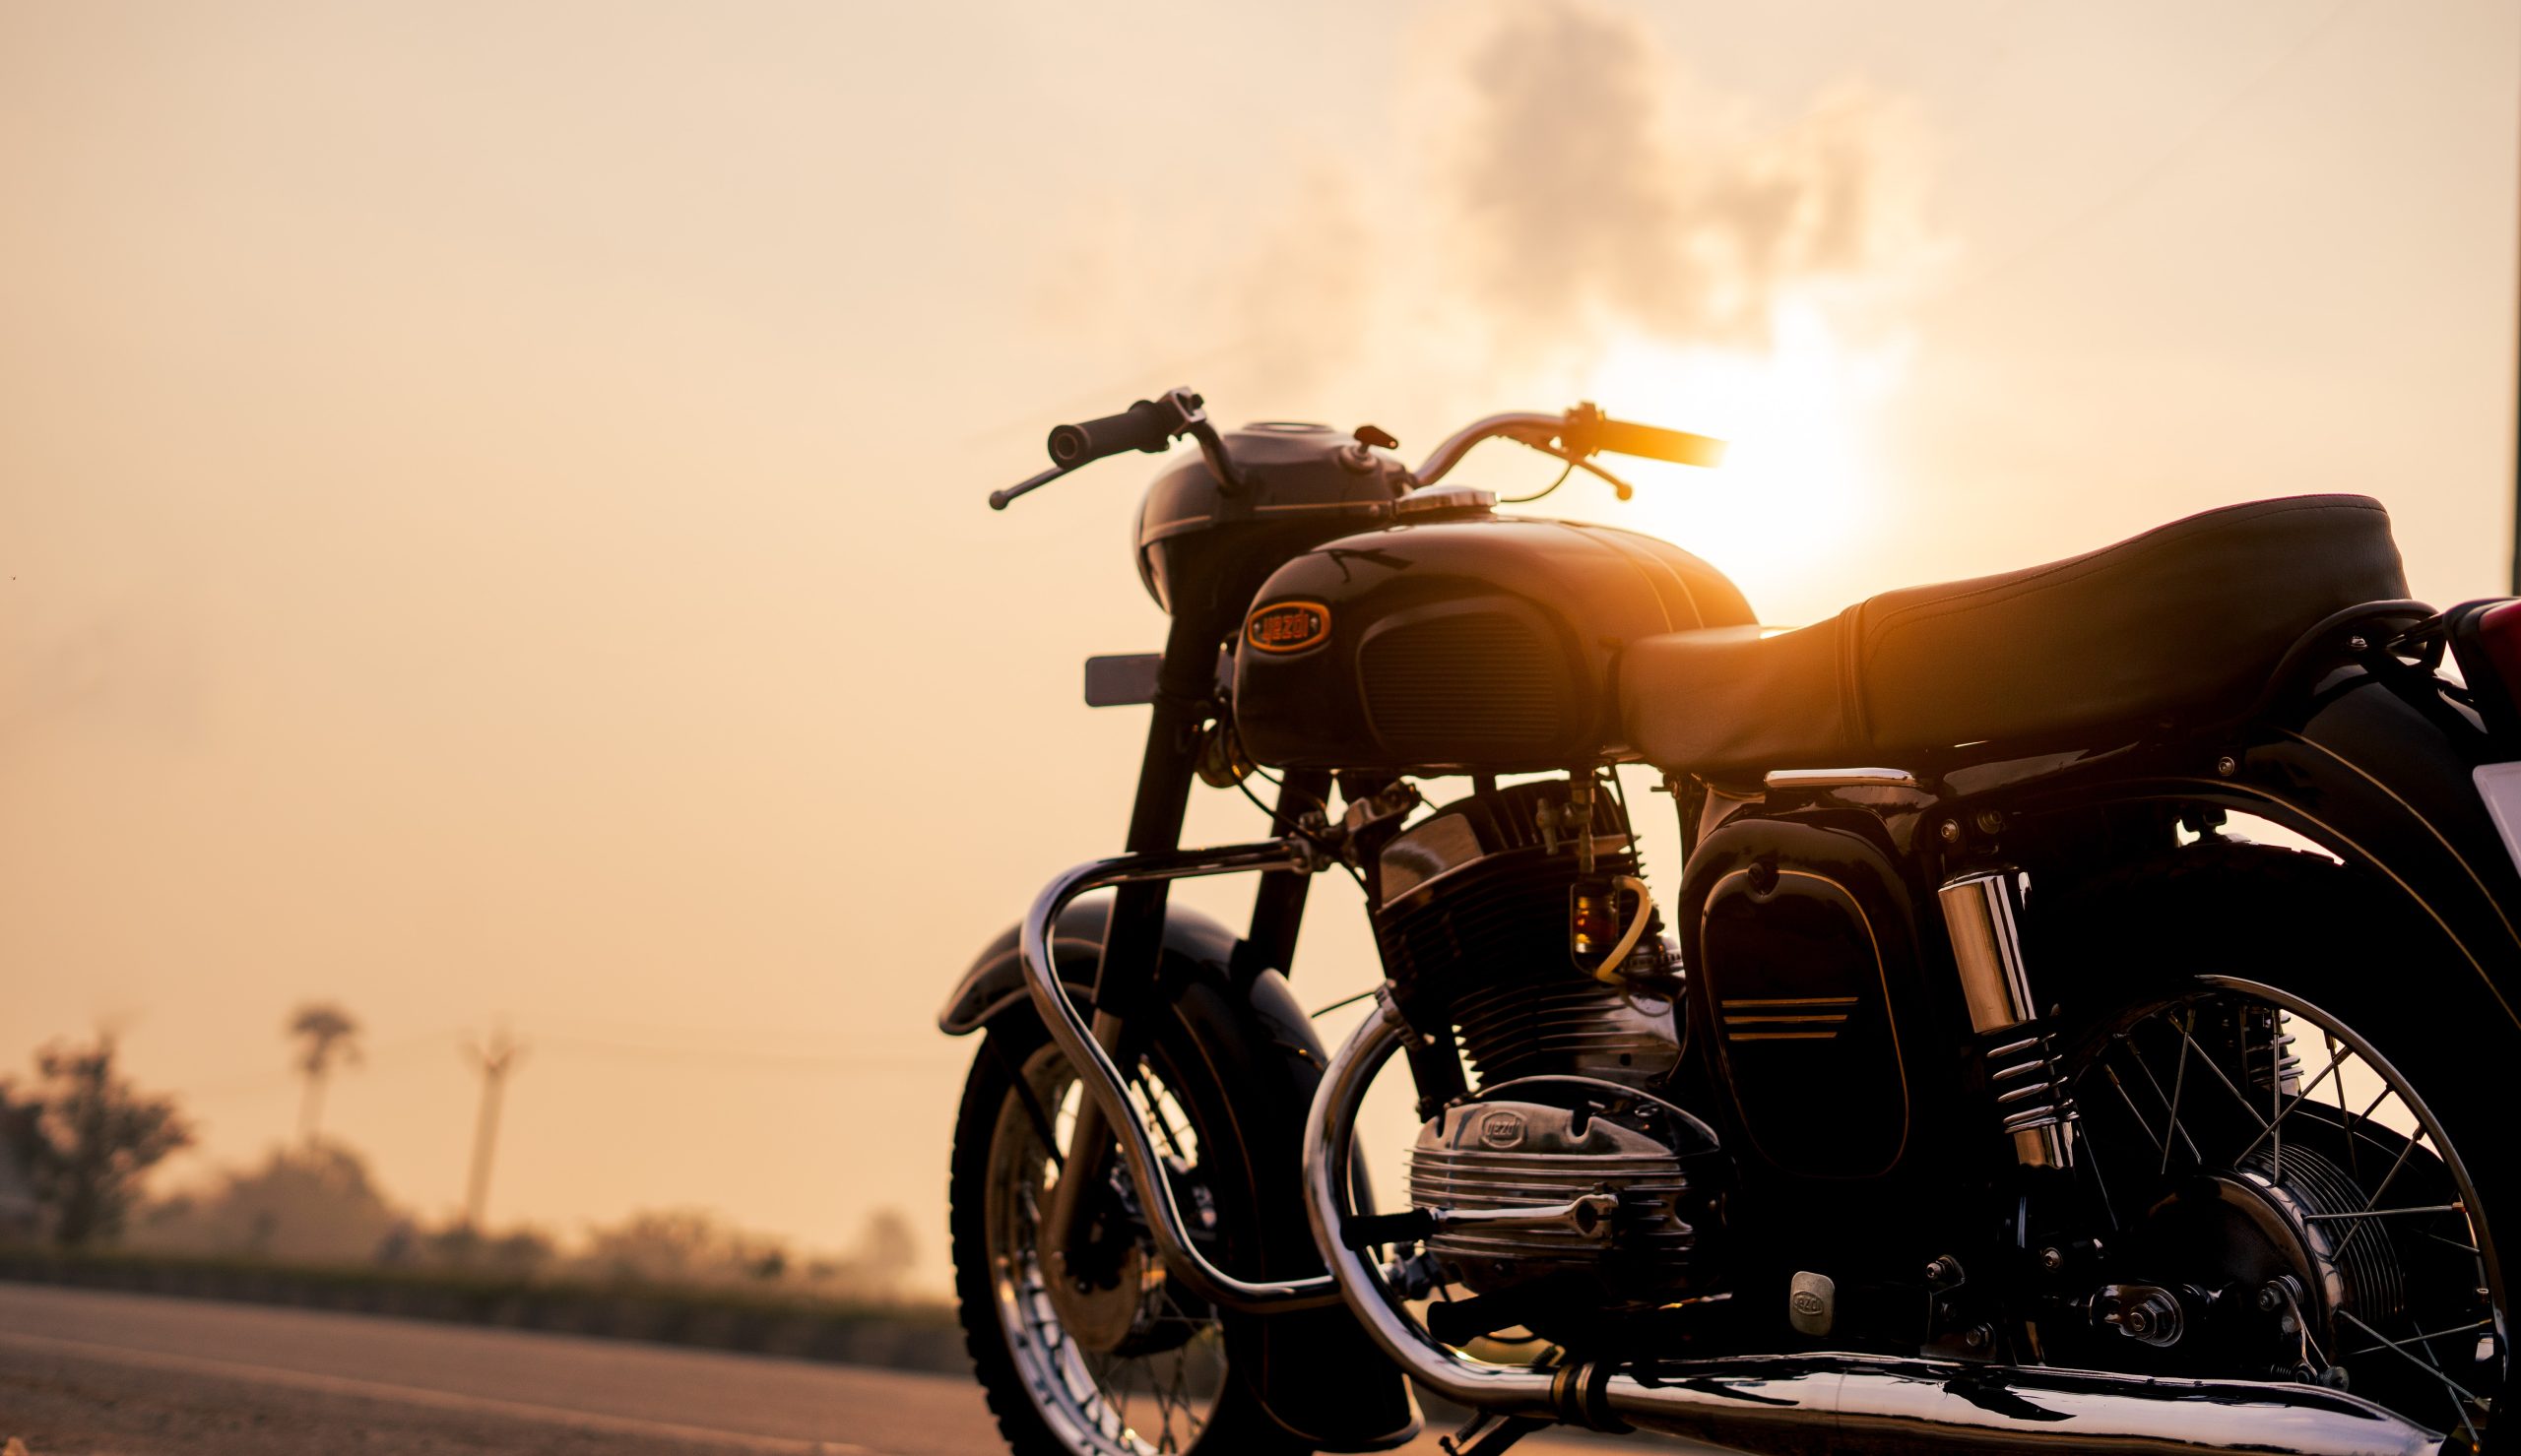 "Vintage Beauties: Restoring Classic Motorcycles to Glory"